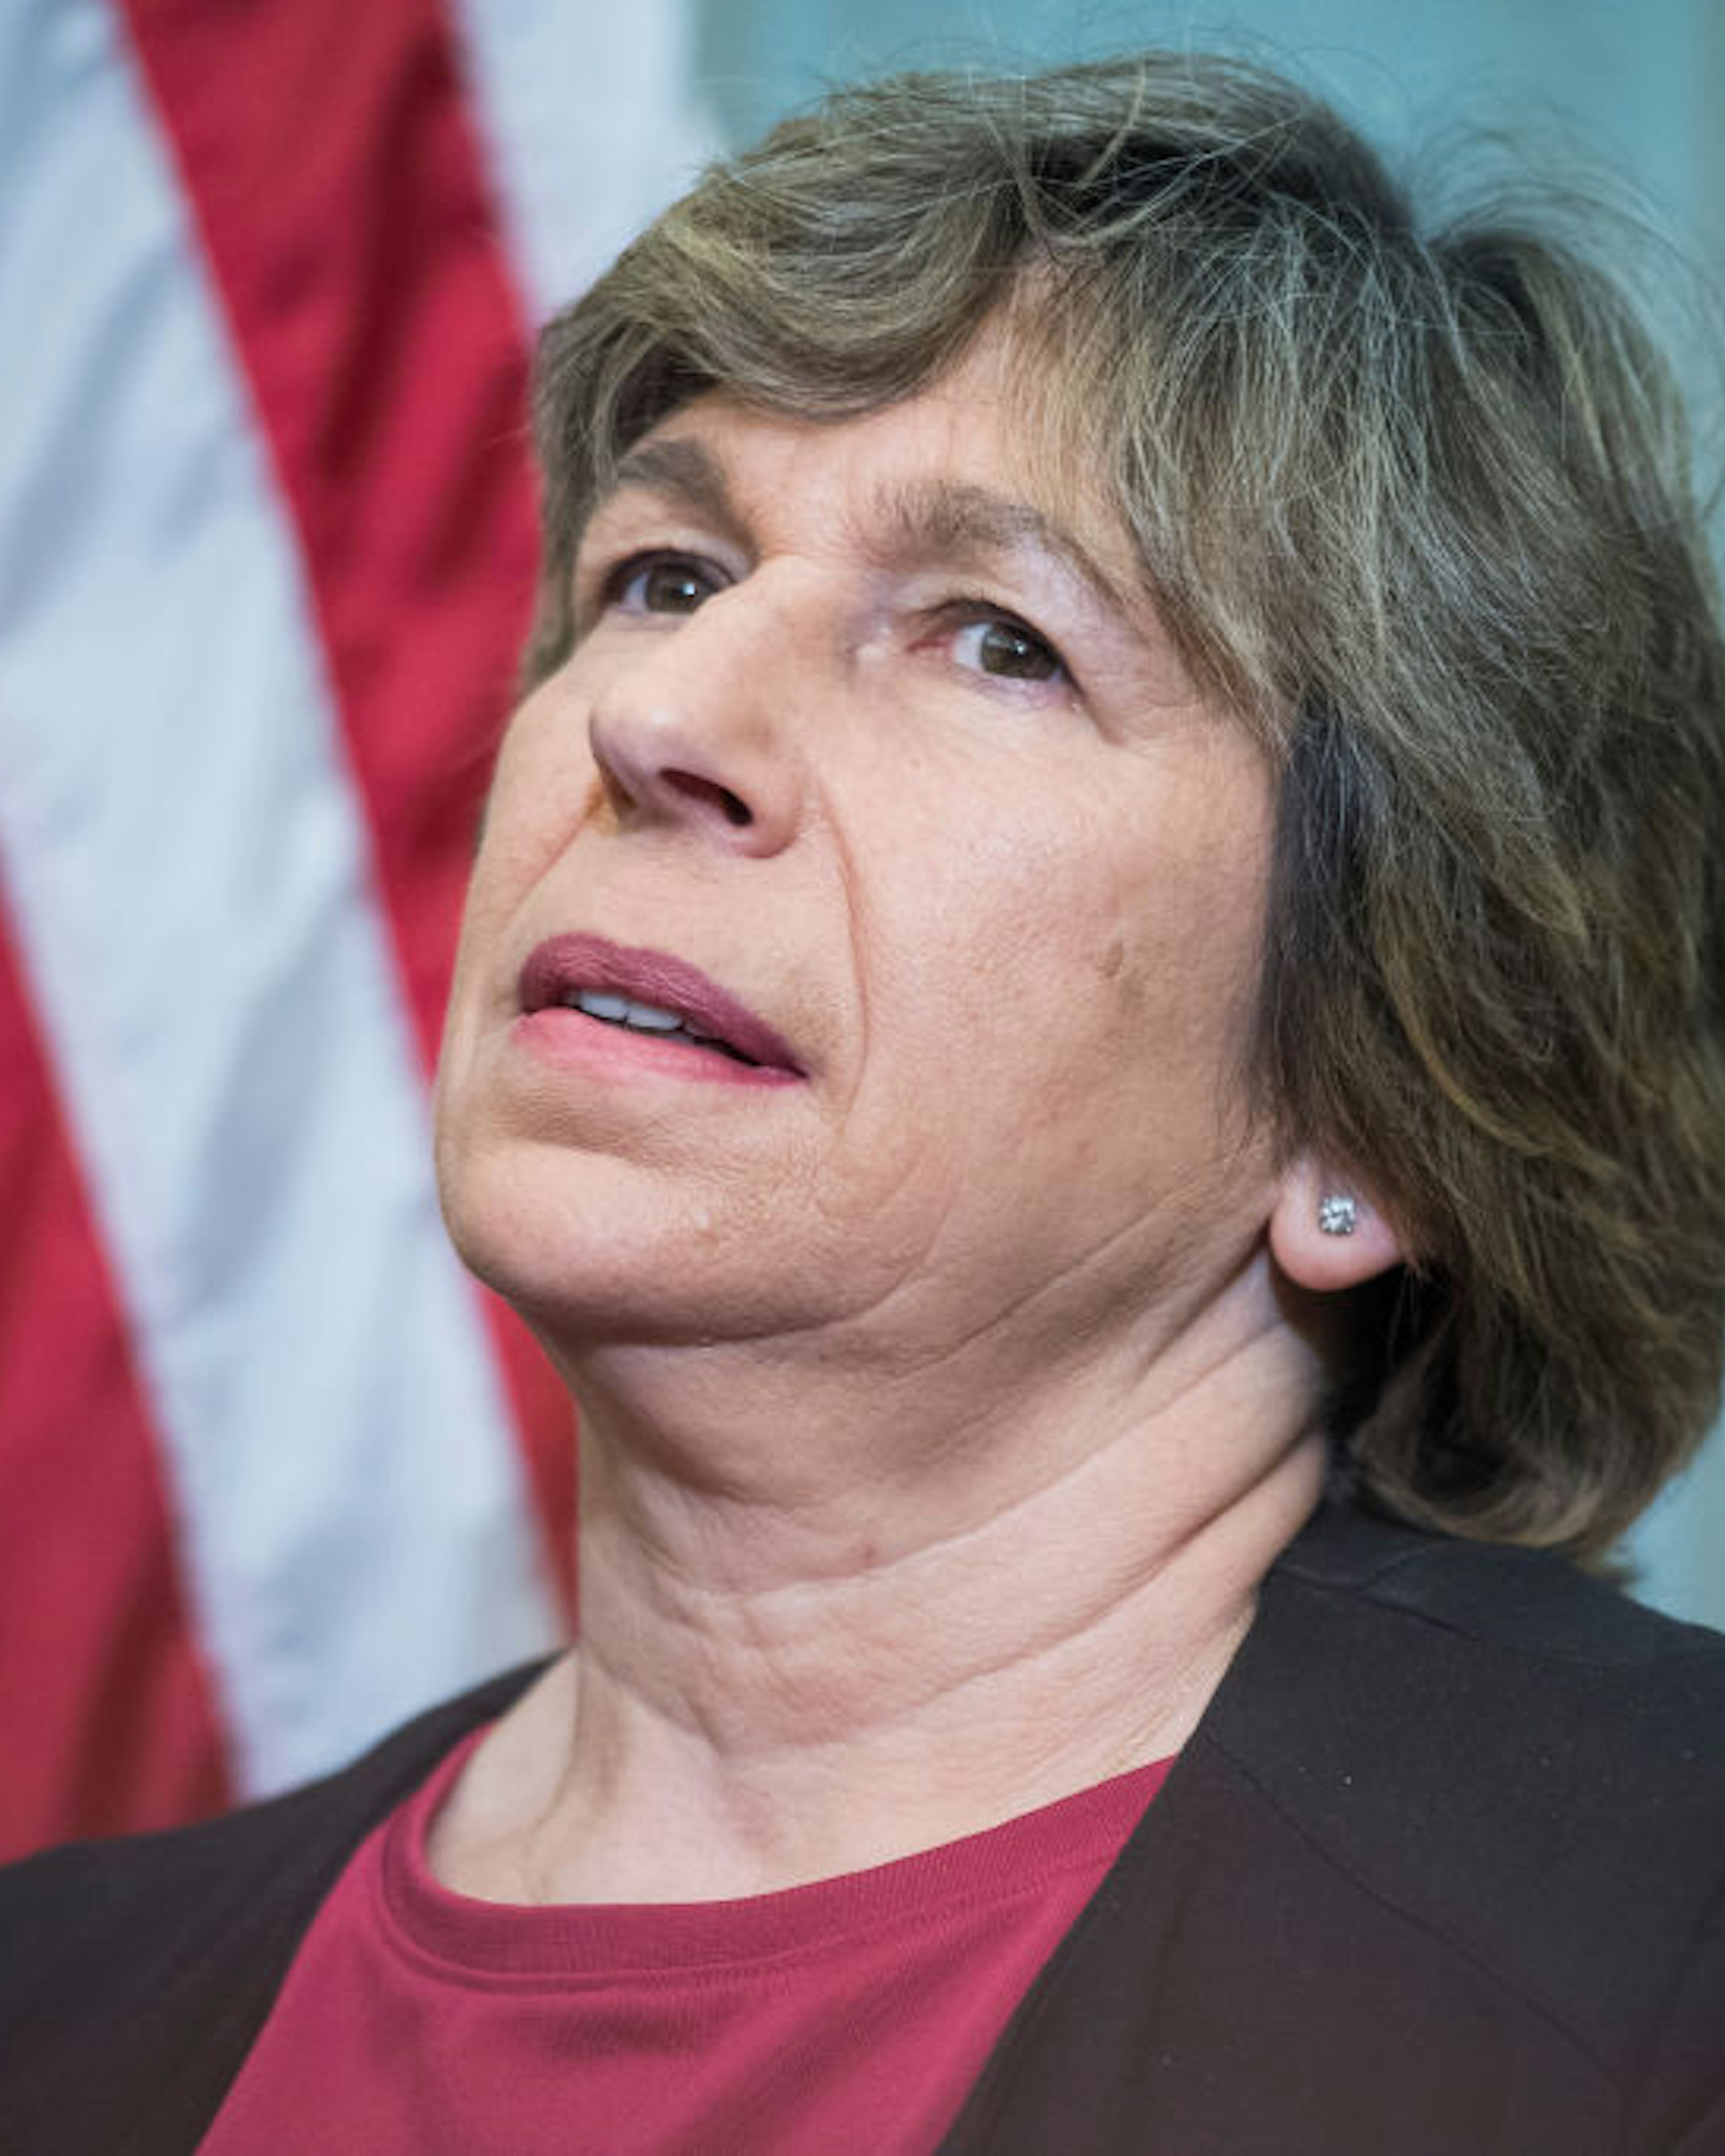 UNITED STATES - MAY 22: Randi Weingarten, president of the American Federation of Teachers, attends a news conference in the Capitol to announce part of the Democrats' "A Better Deal," plan that would increase teachers' pay and make investments in schools on May 22, 2018. (Photo By Tom Williams/CQ Roll Call)